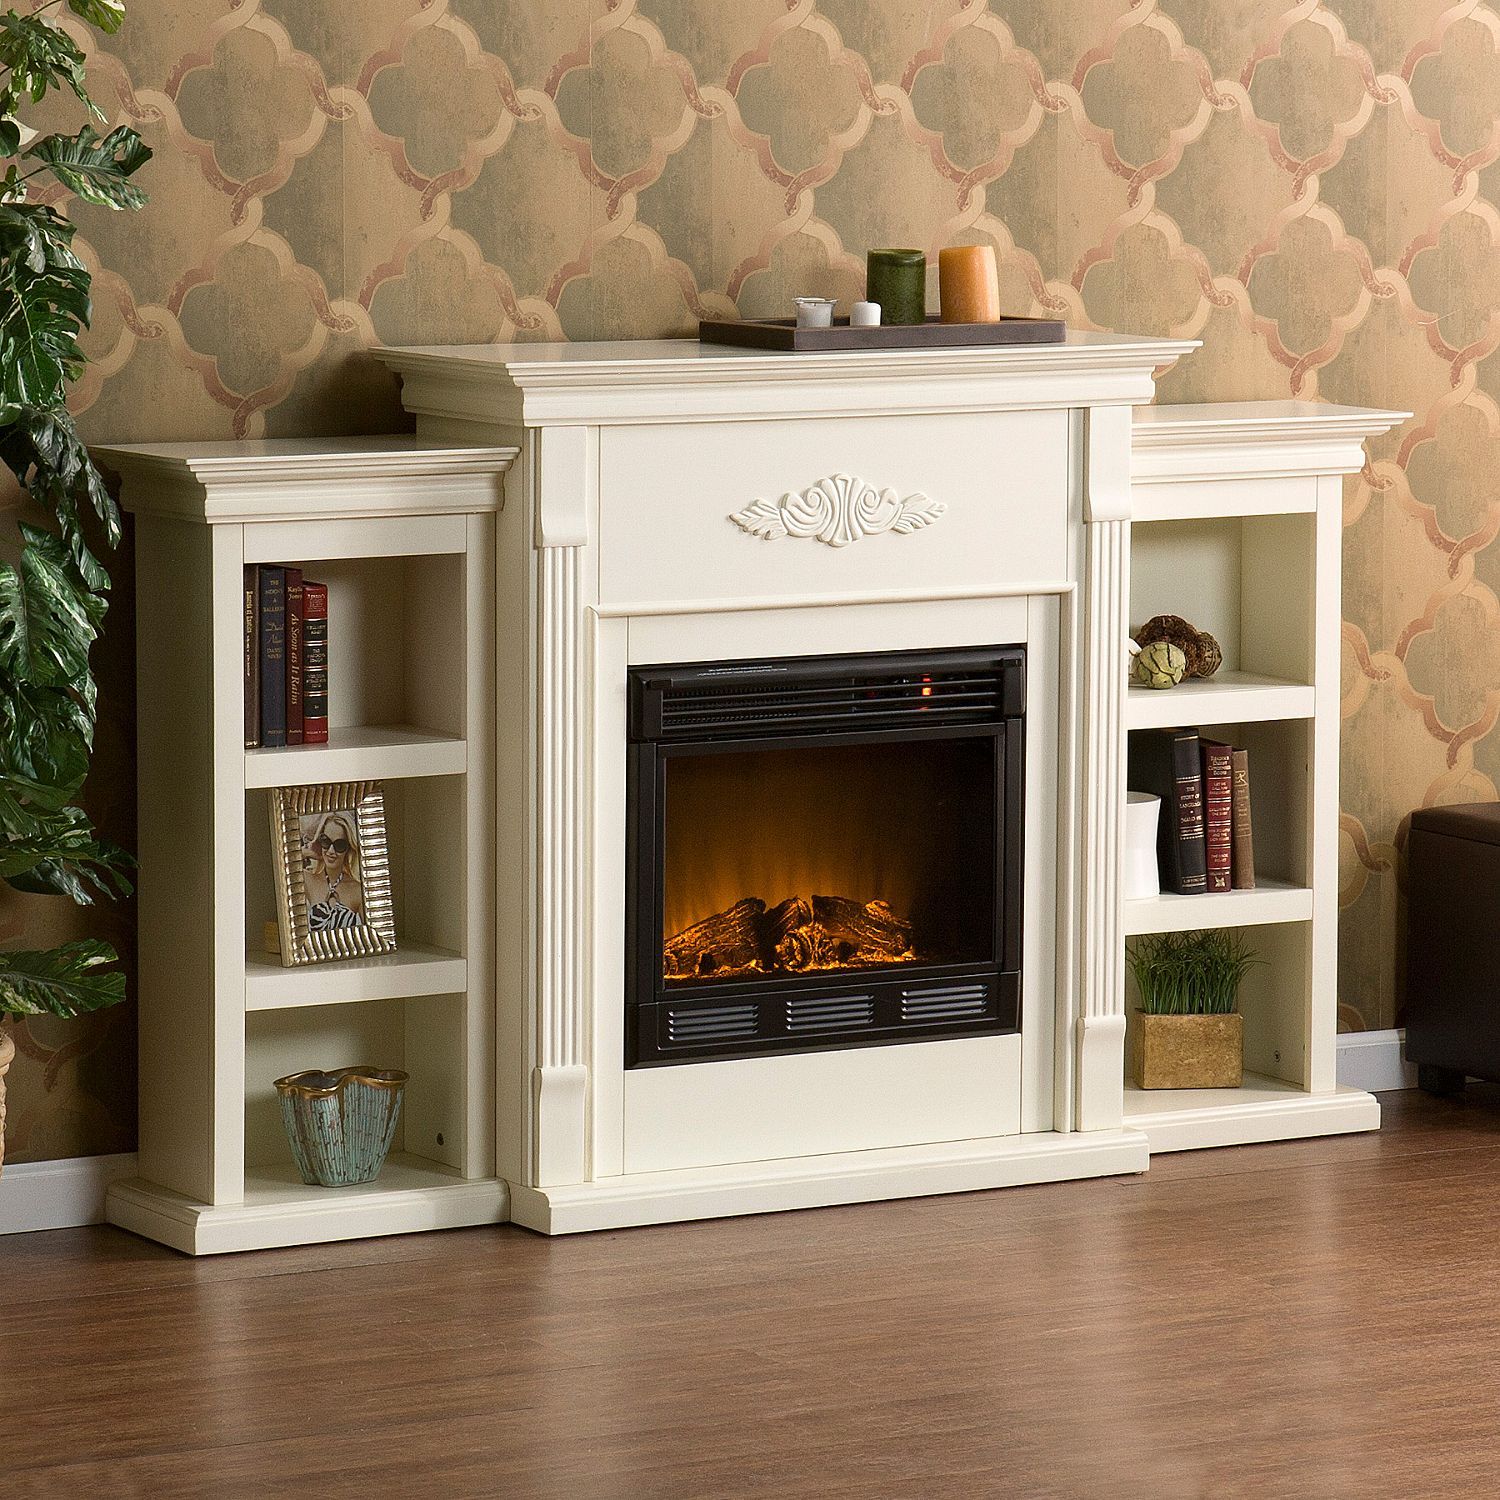 White Electric Fireplace with Shelves Inspirational Emerson Electric Fireplace Ivory Sam S Club